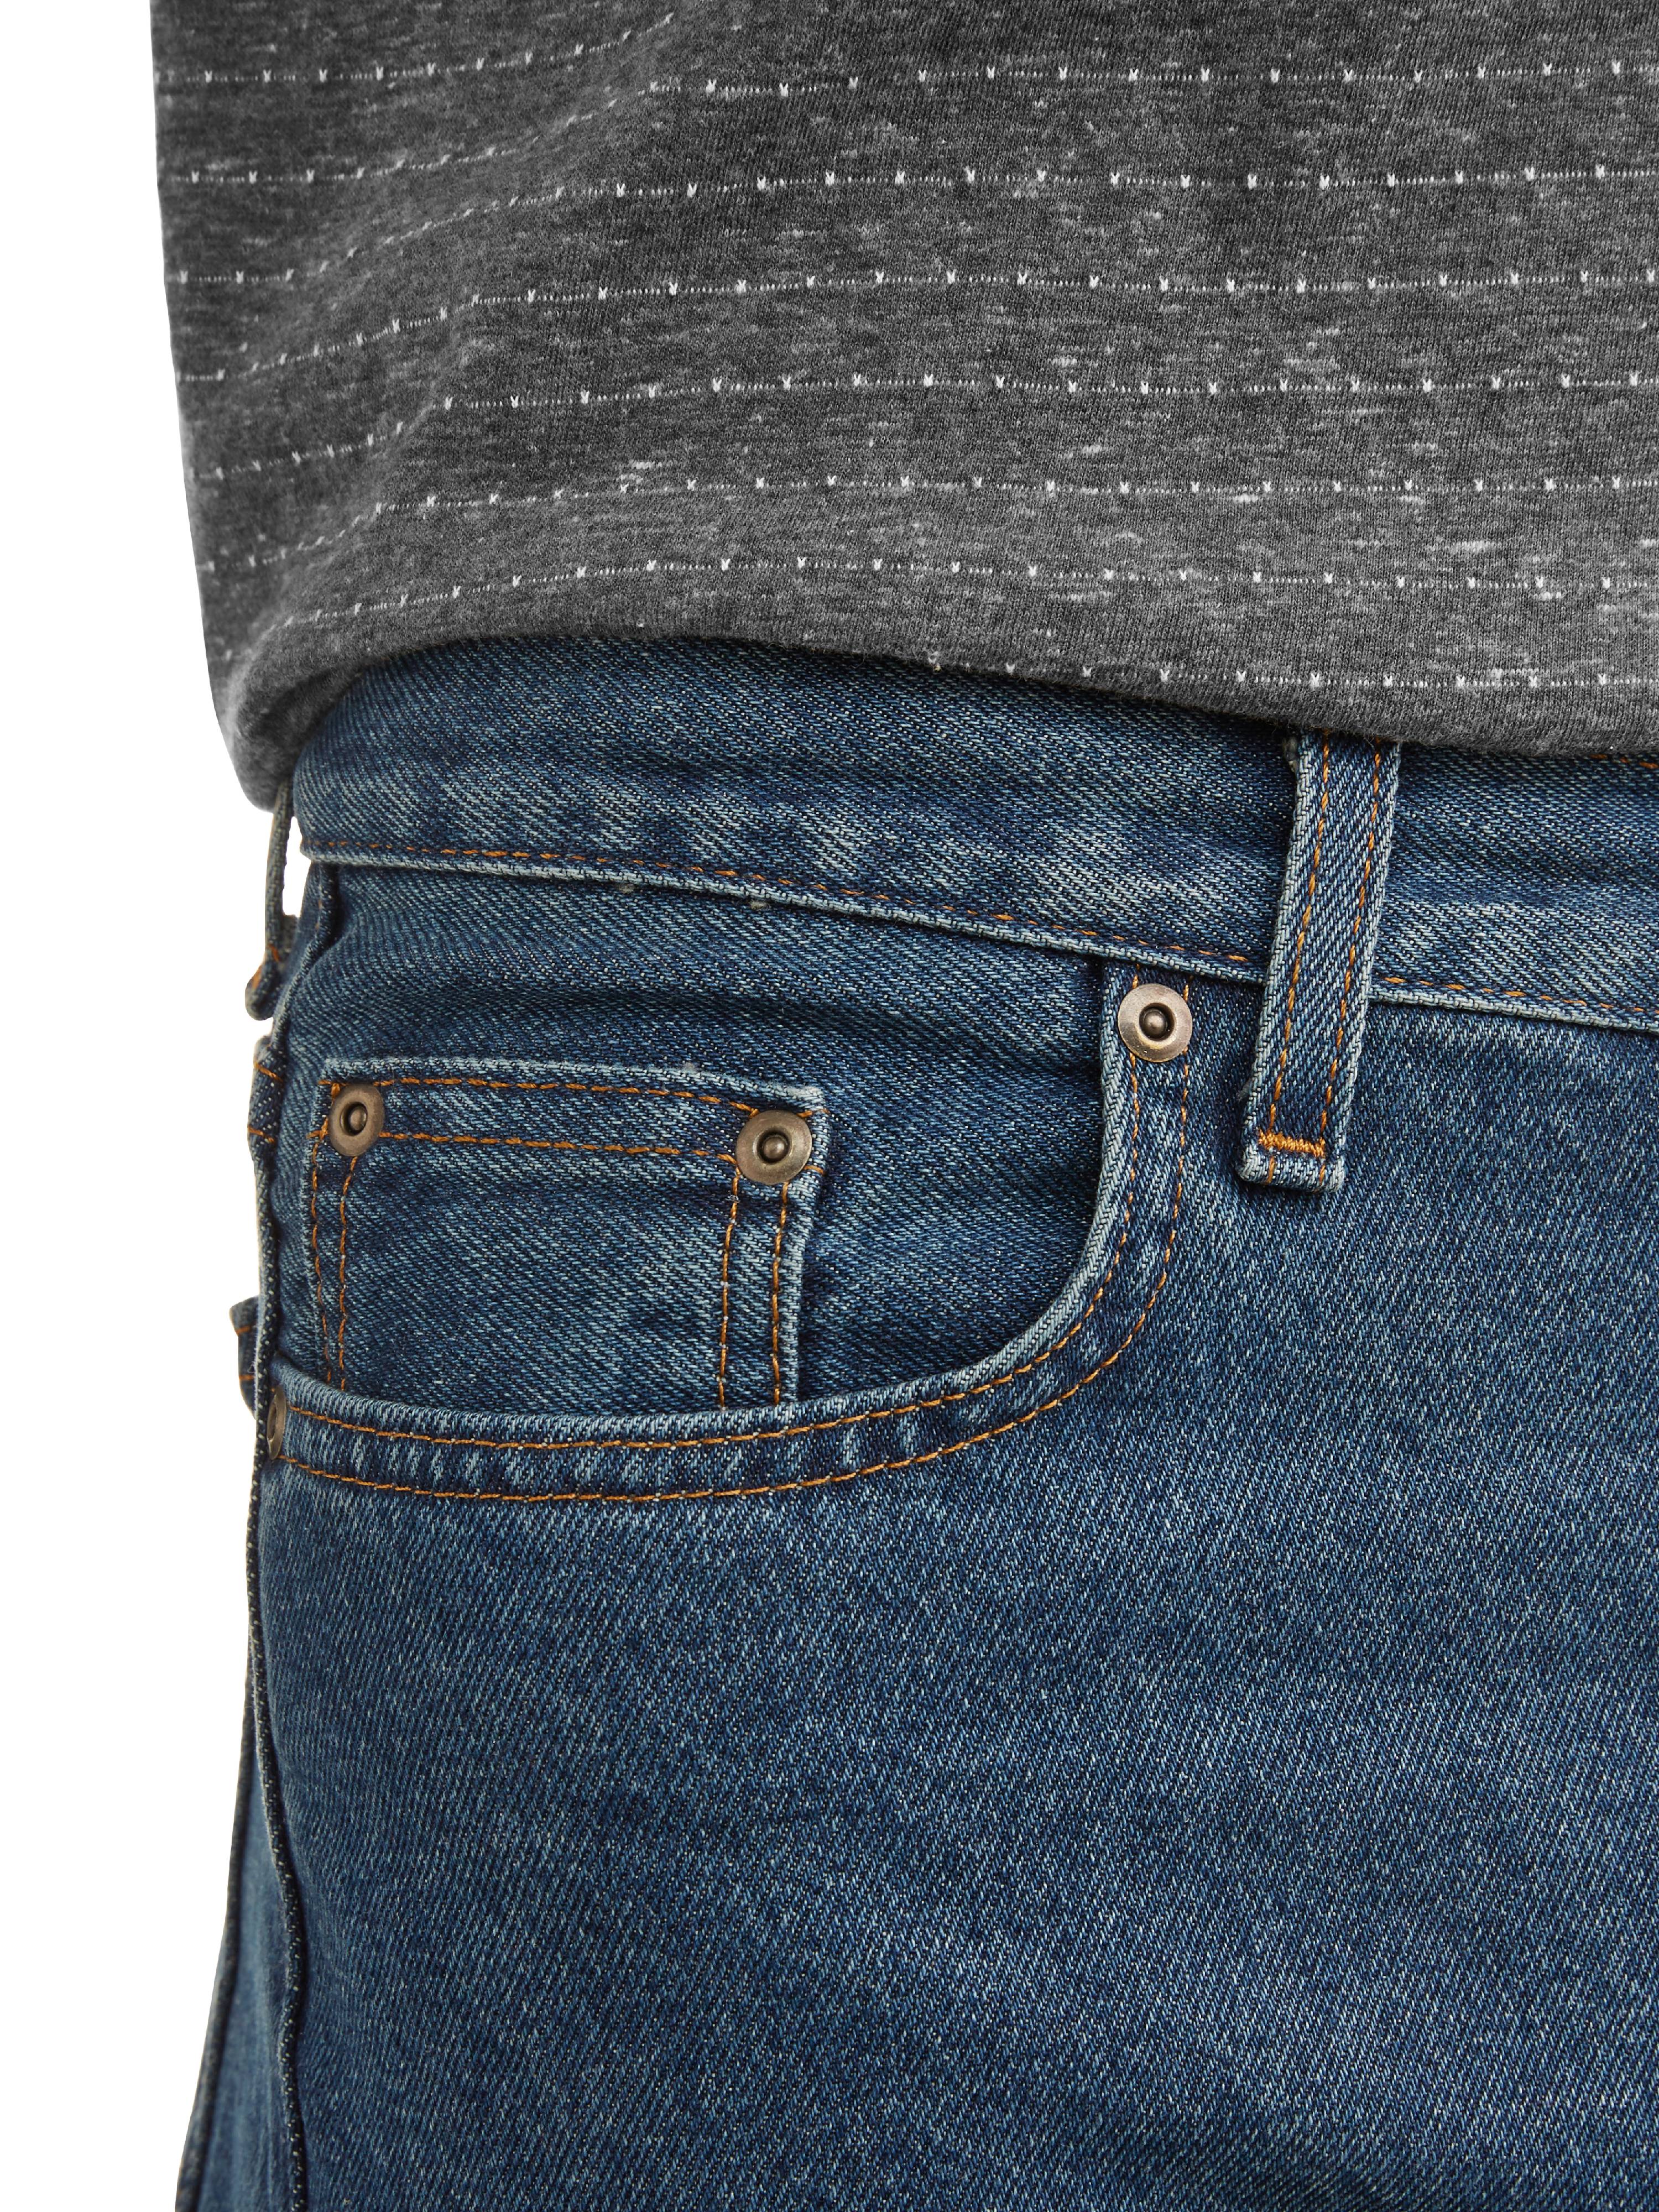 George Men's and Big Men's 100% Cotton Relaxed Fit Jeans - image 2 of 6